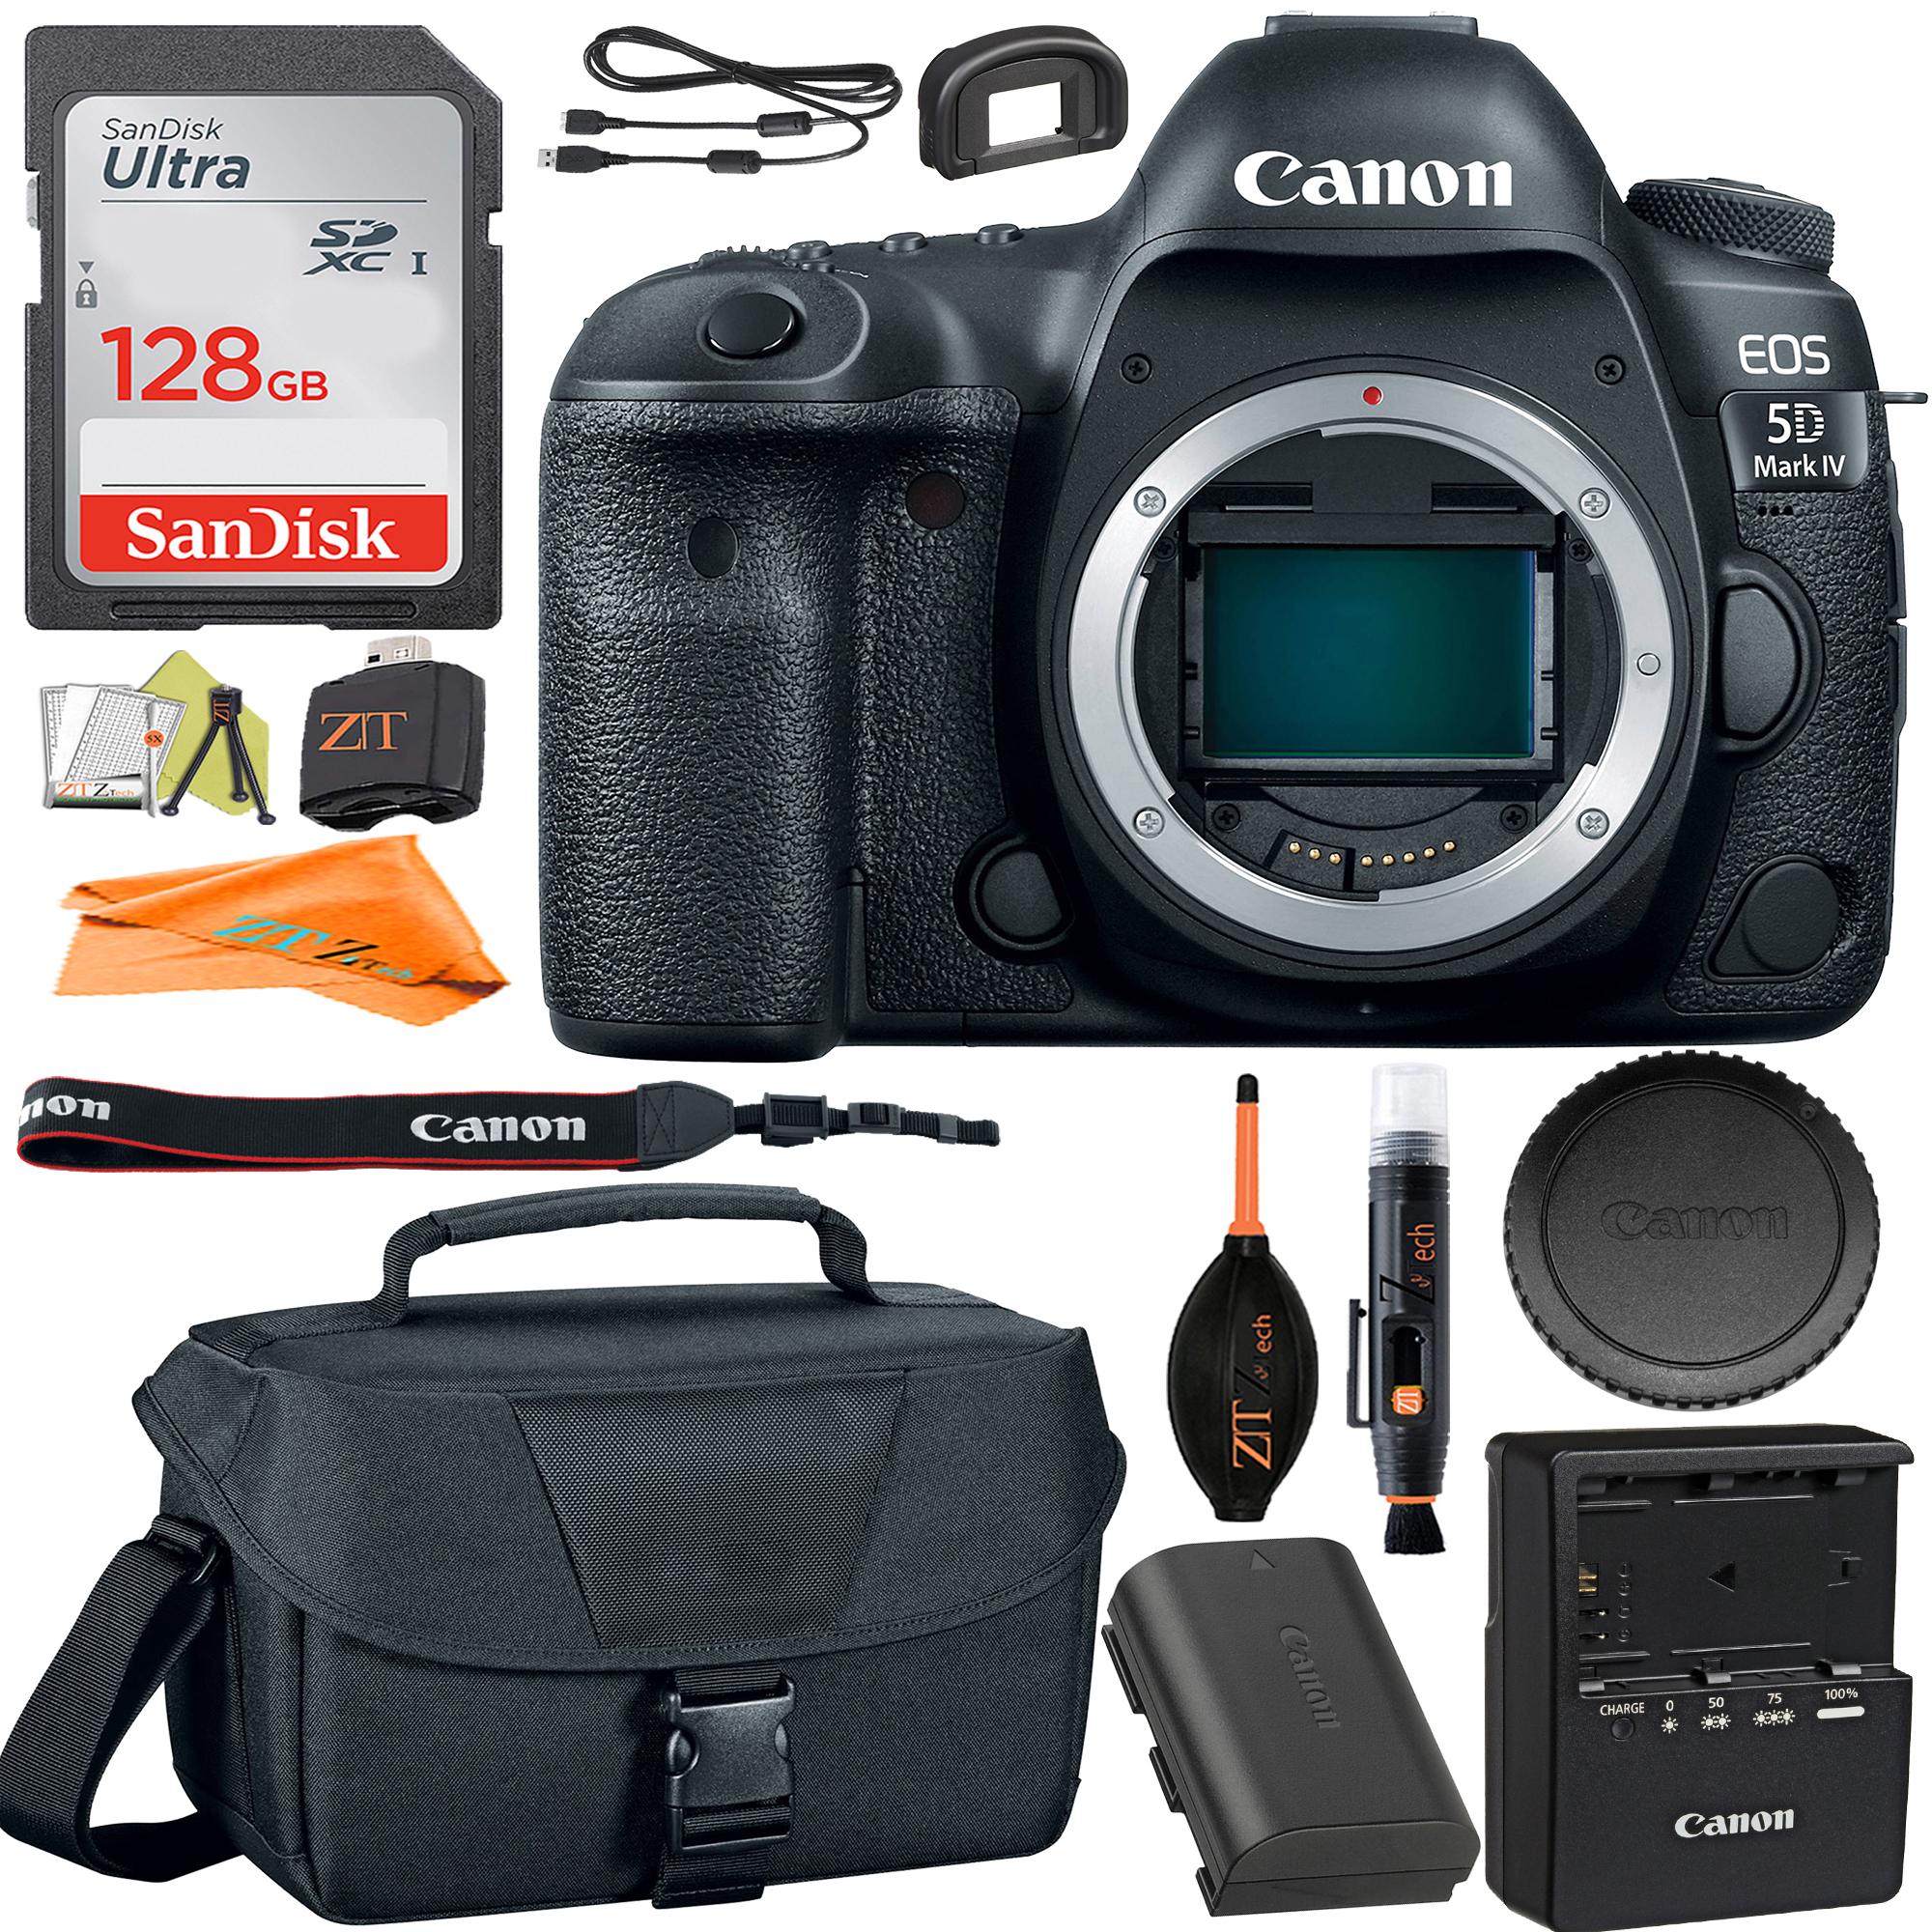 Canon EOS 5D Mark IV DSLR Camera (Body Only) with SanDisk 128GB Card + Case + ZeeTech Accessory Bundle